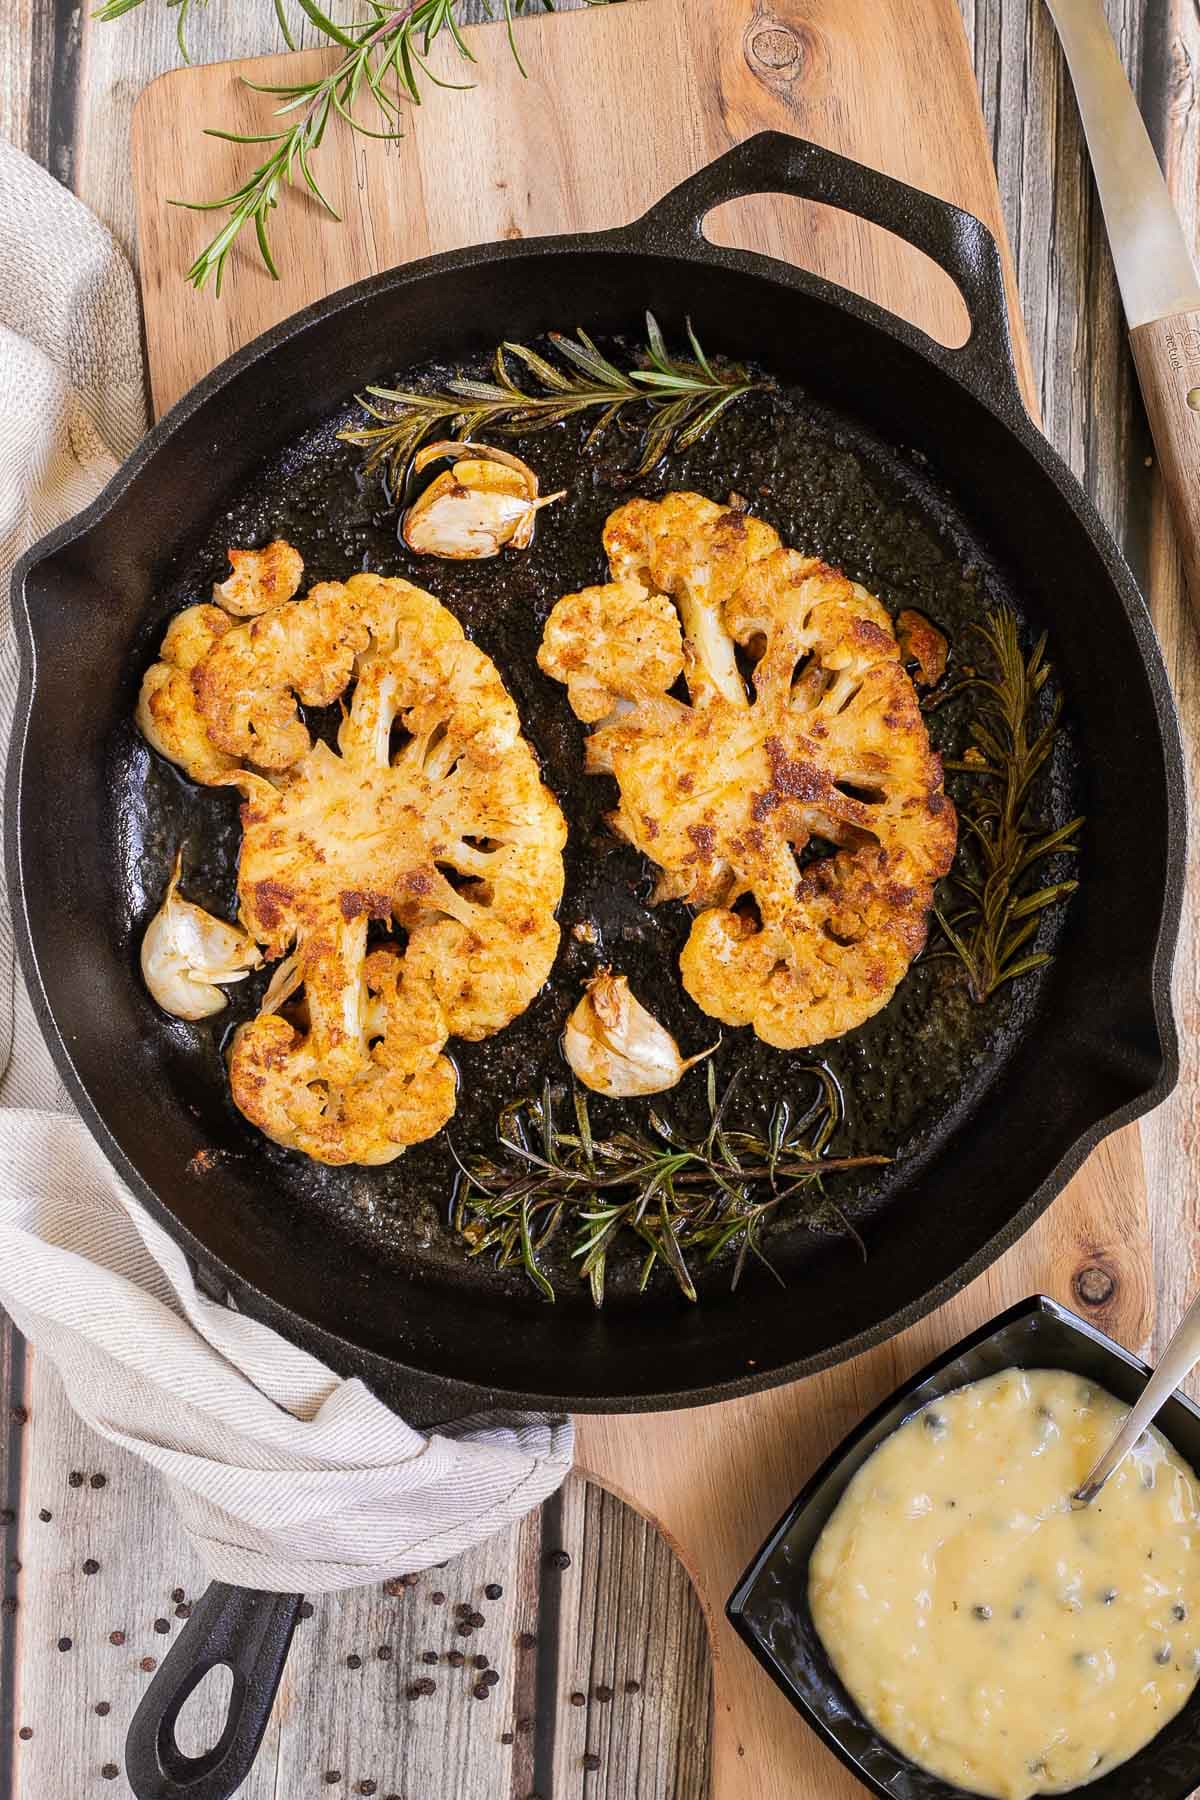 2 crispy brown yellow cauliflower slices in a cast-iron skillet surrounded by roasted garlic cloves and wilted rosemary twigs. A small black bowl of green peppercorn sauce is next to it.